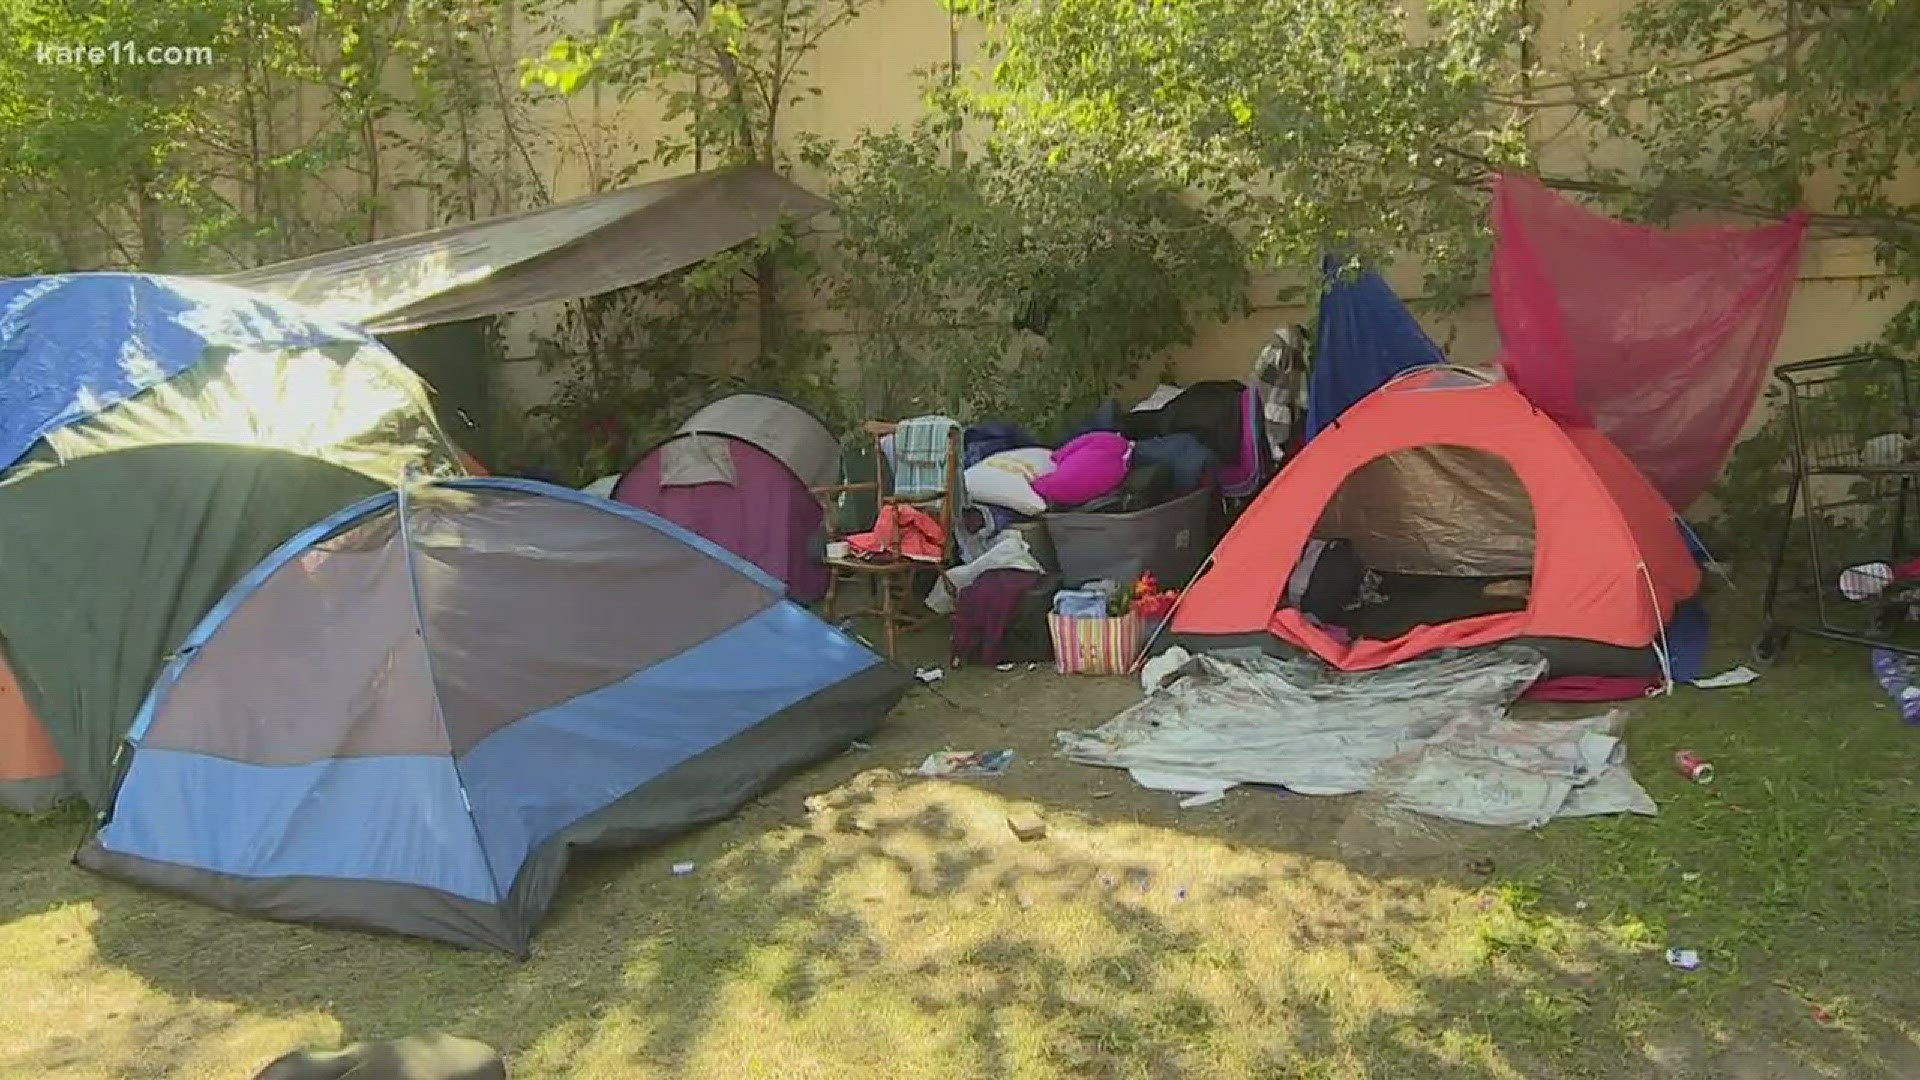 City looking to relocate Hiawatha encampment residents; site grows